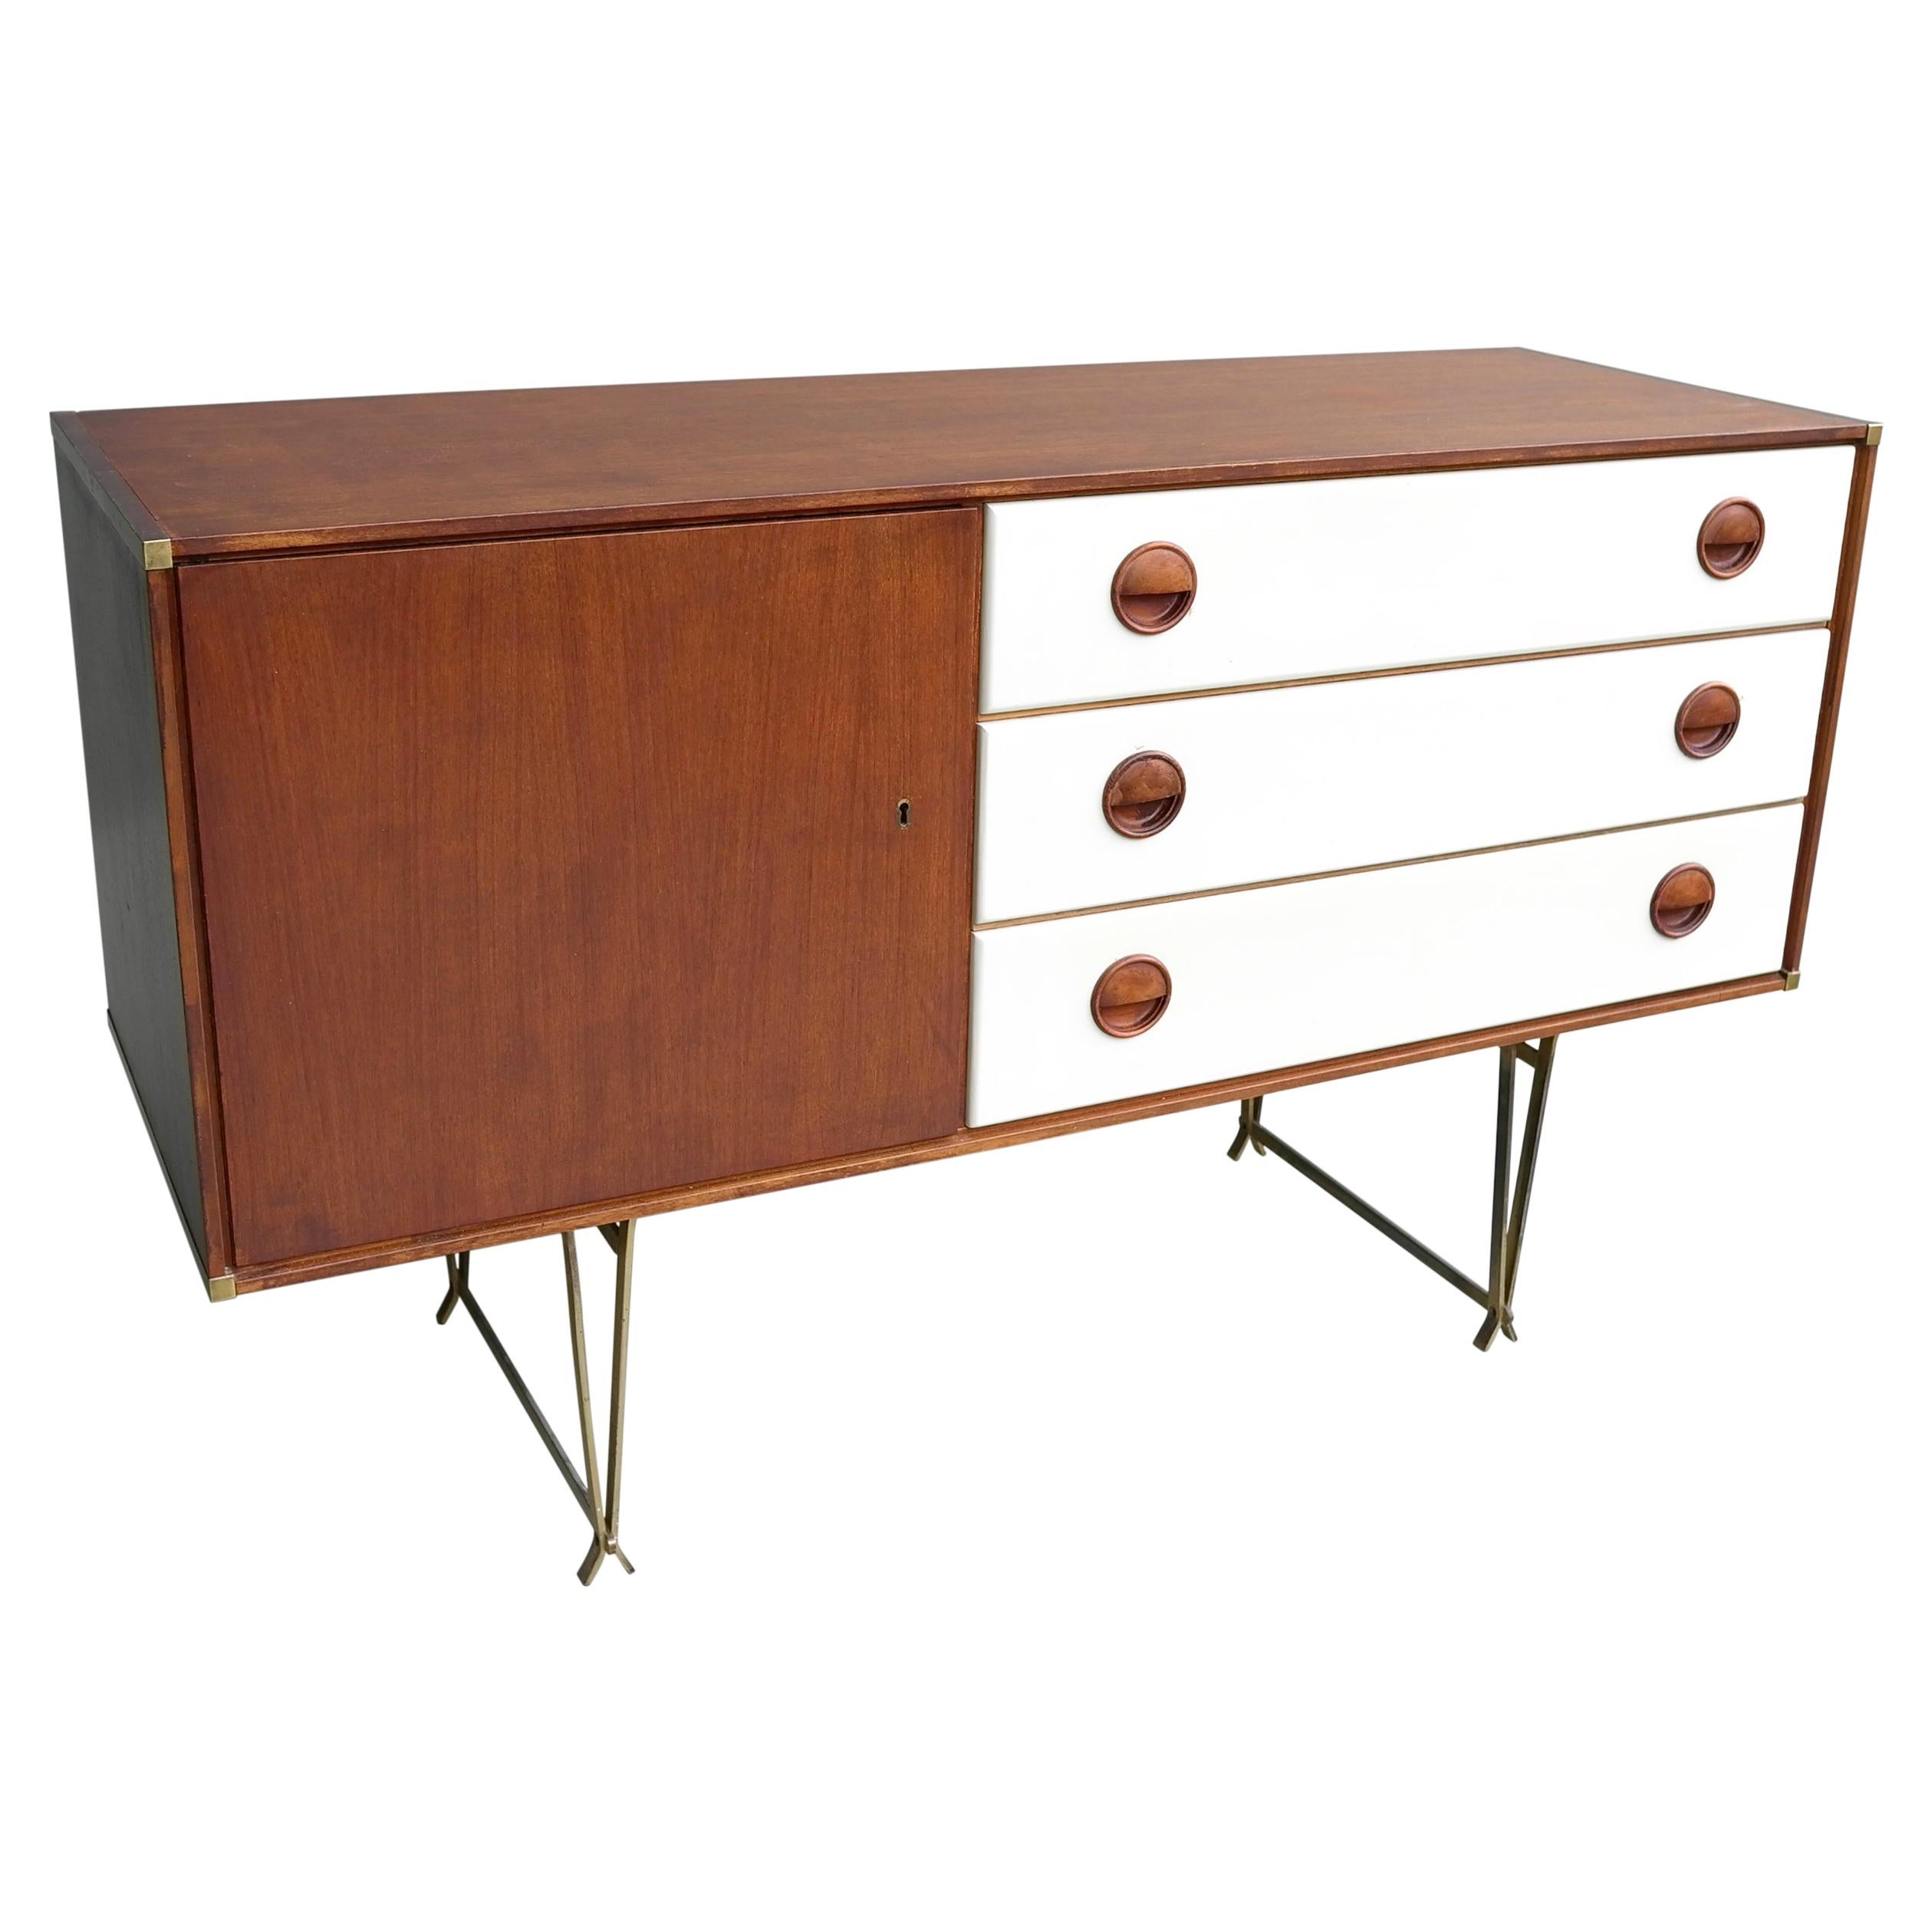 Fristho Sideboard by Wim Crouwel in Teak and White, with Fine Brass Leggs, 1954